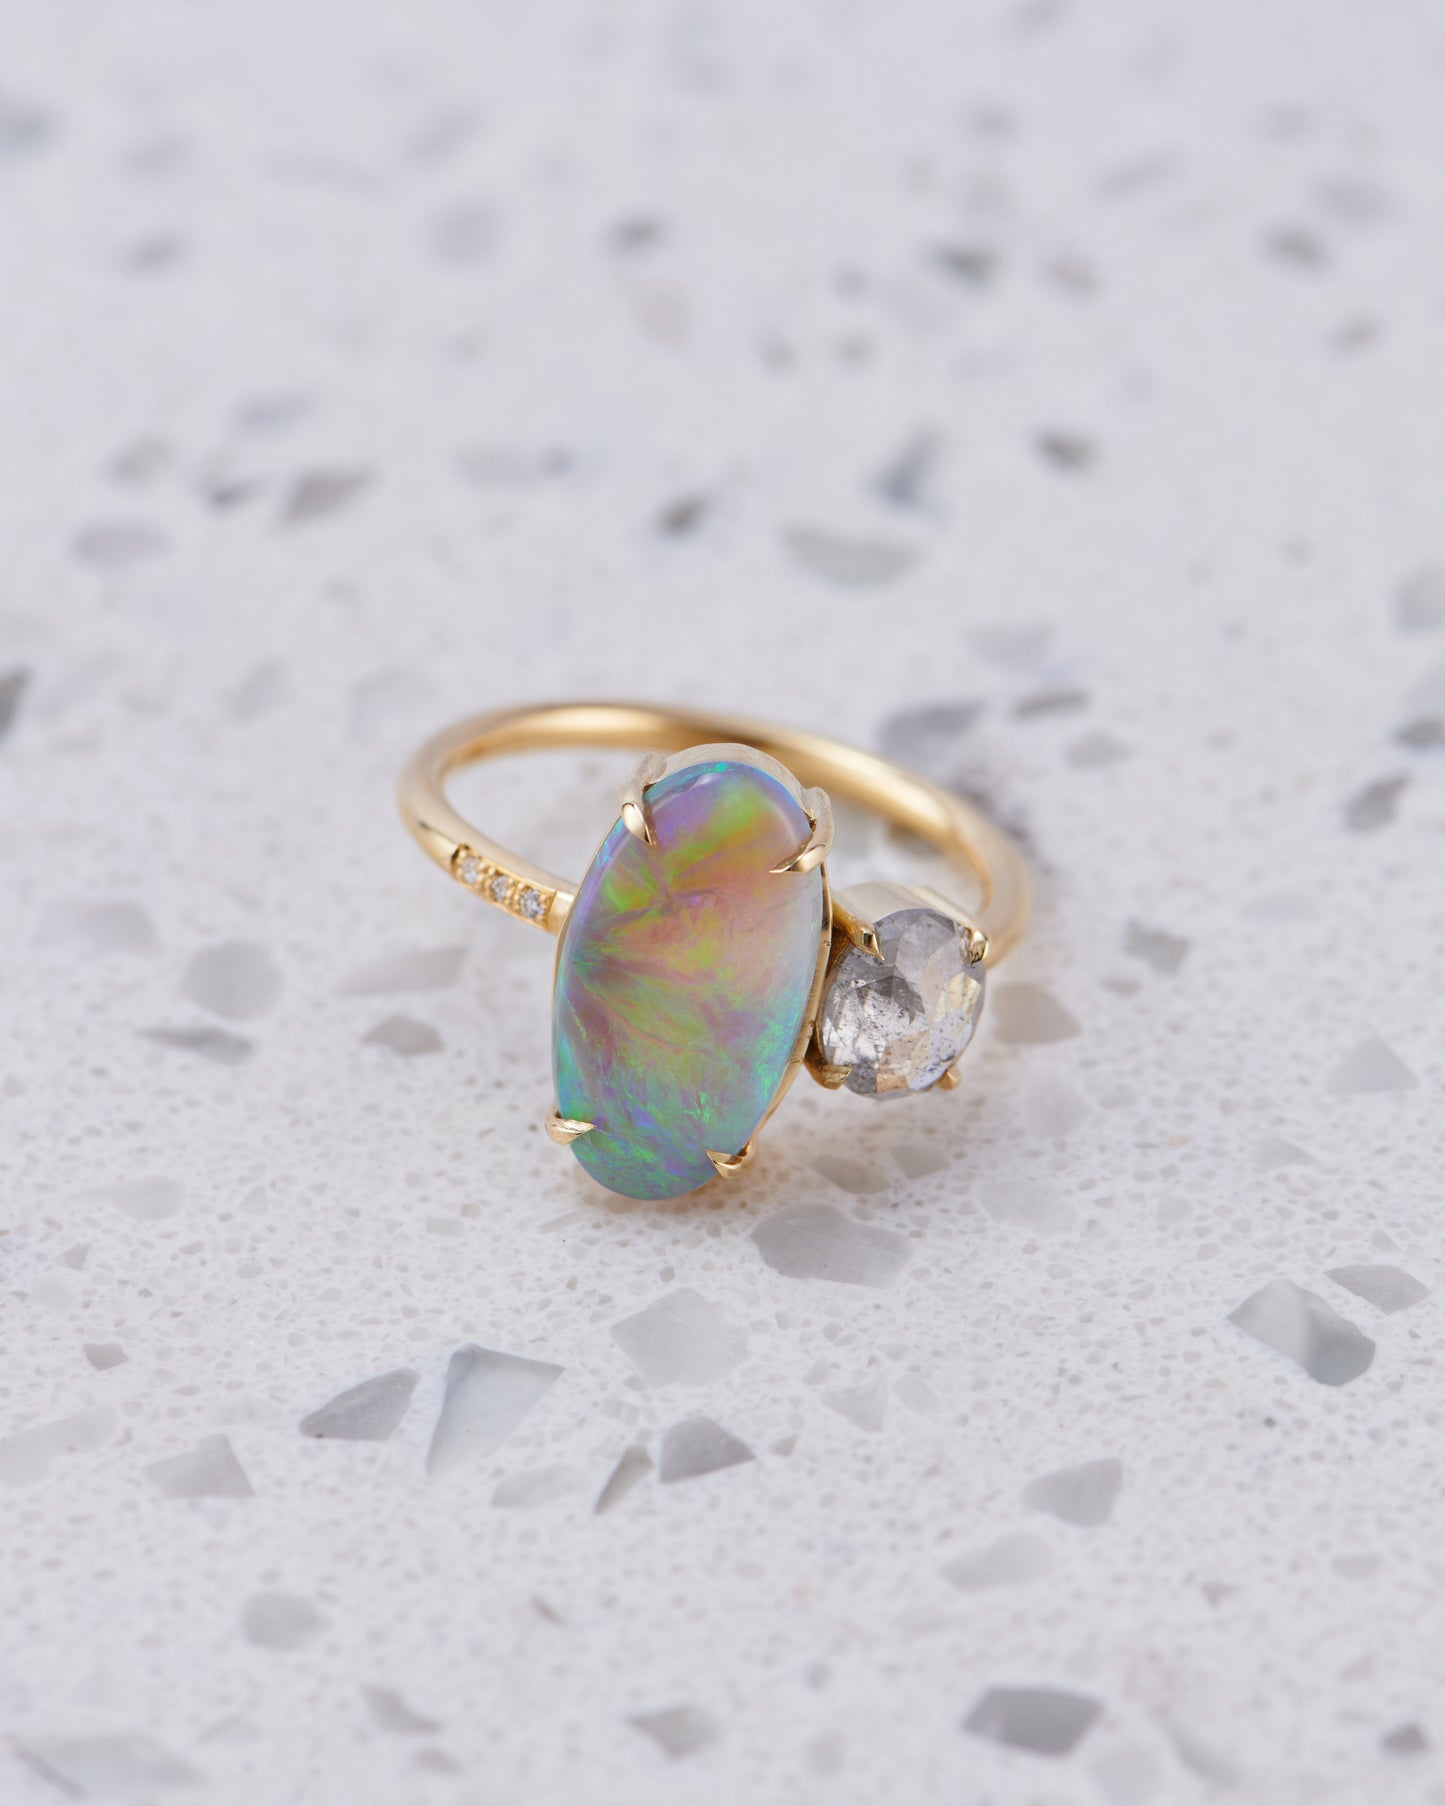 One-off Semi-Black Opal Splice with a Salt & Pepper Diamond in 18ct Yellow Gold, Size P and a half (In Stock)